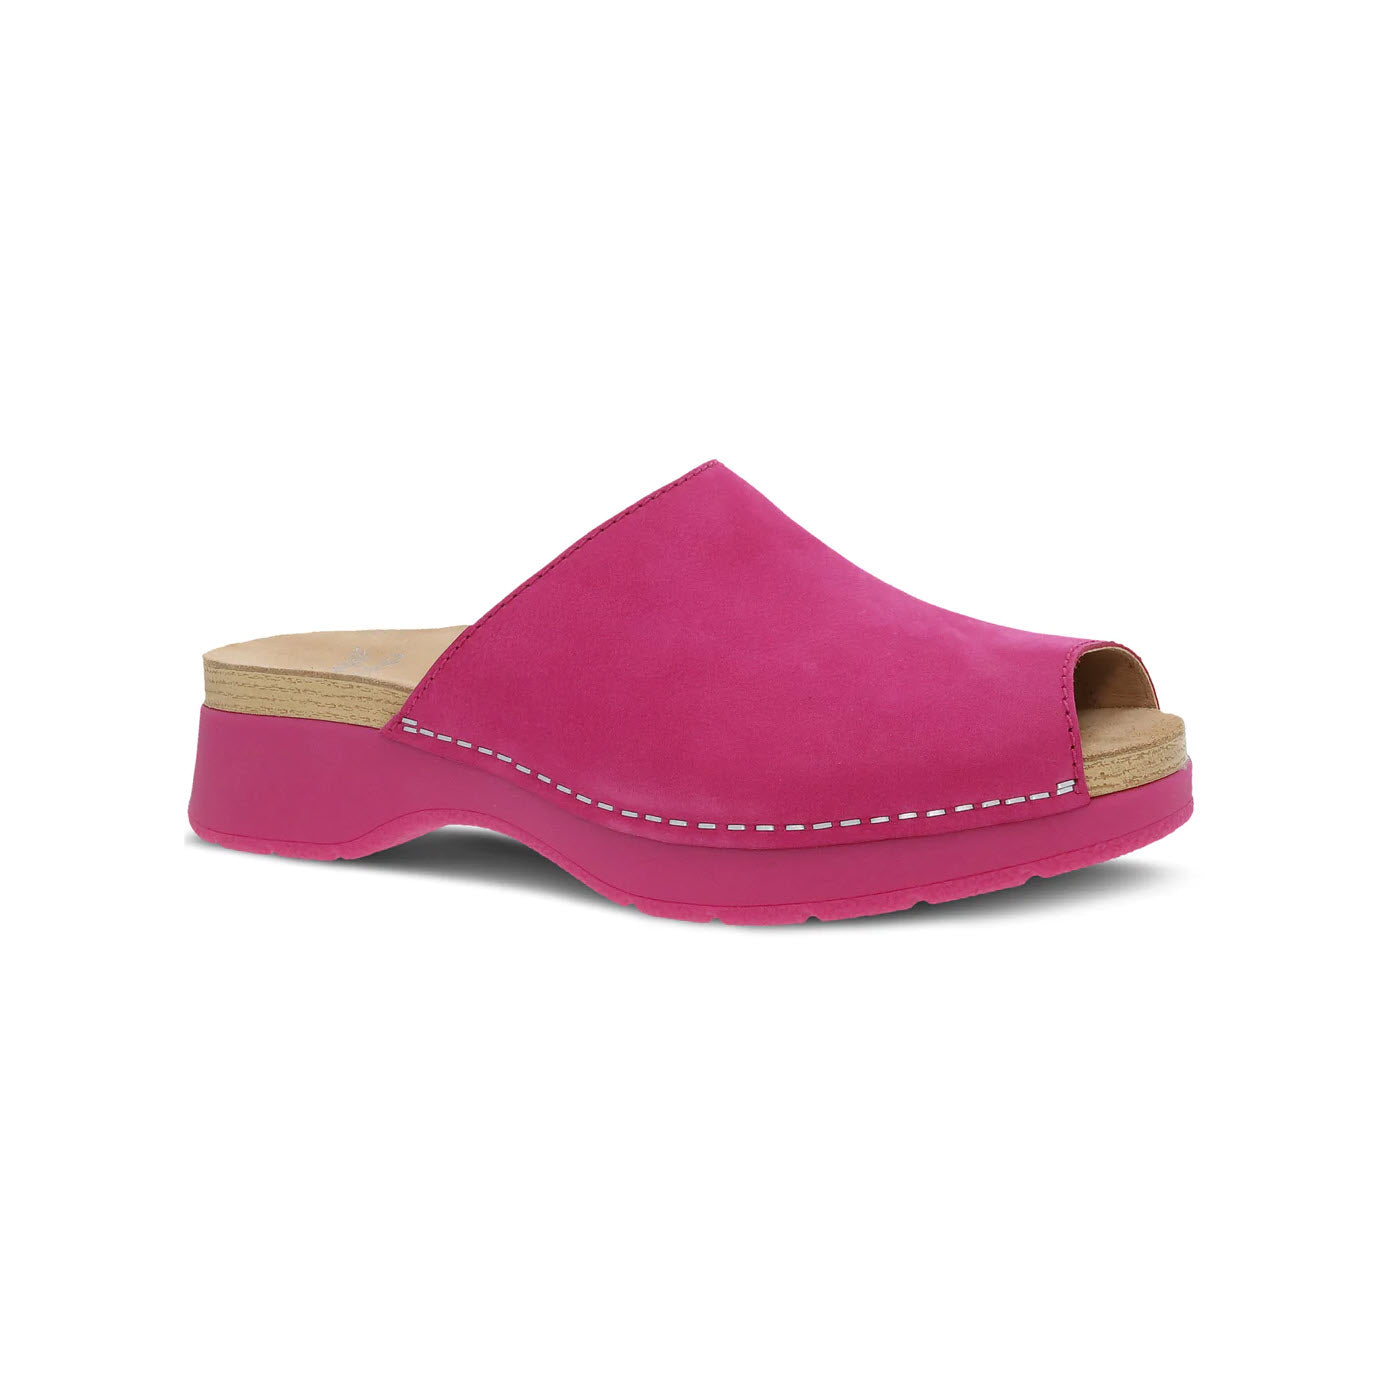 A bright pink, single-strap leather clog with a wooden sole and stapled construction, isolated on a white background - the Dansko Ravyn Fuchsia - Womens.